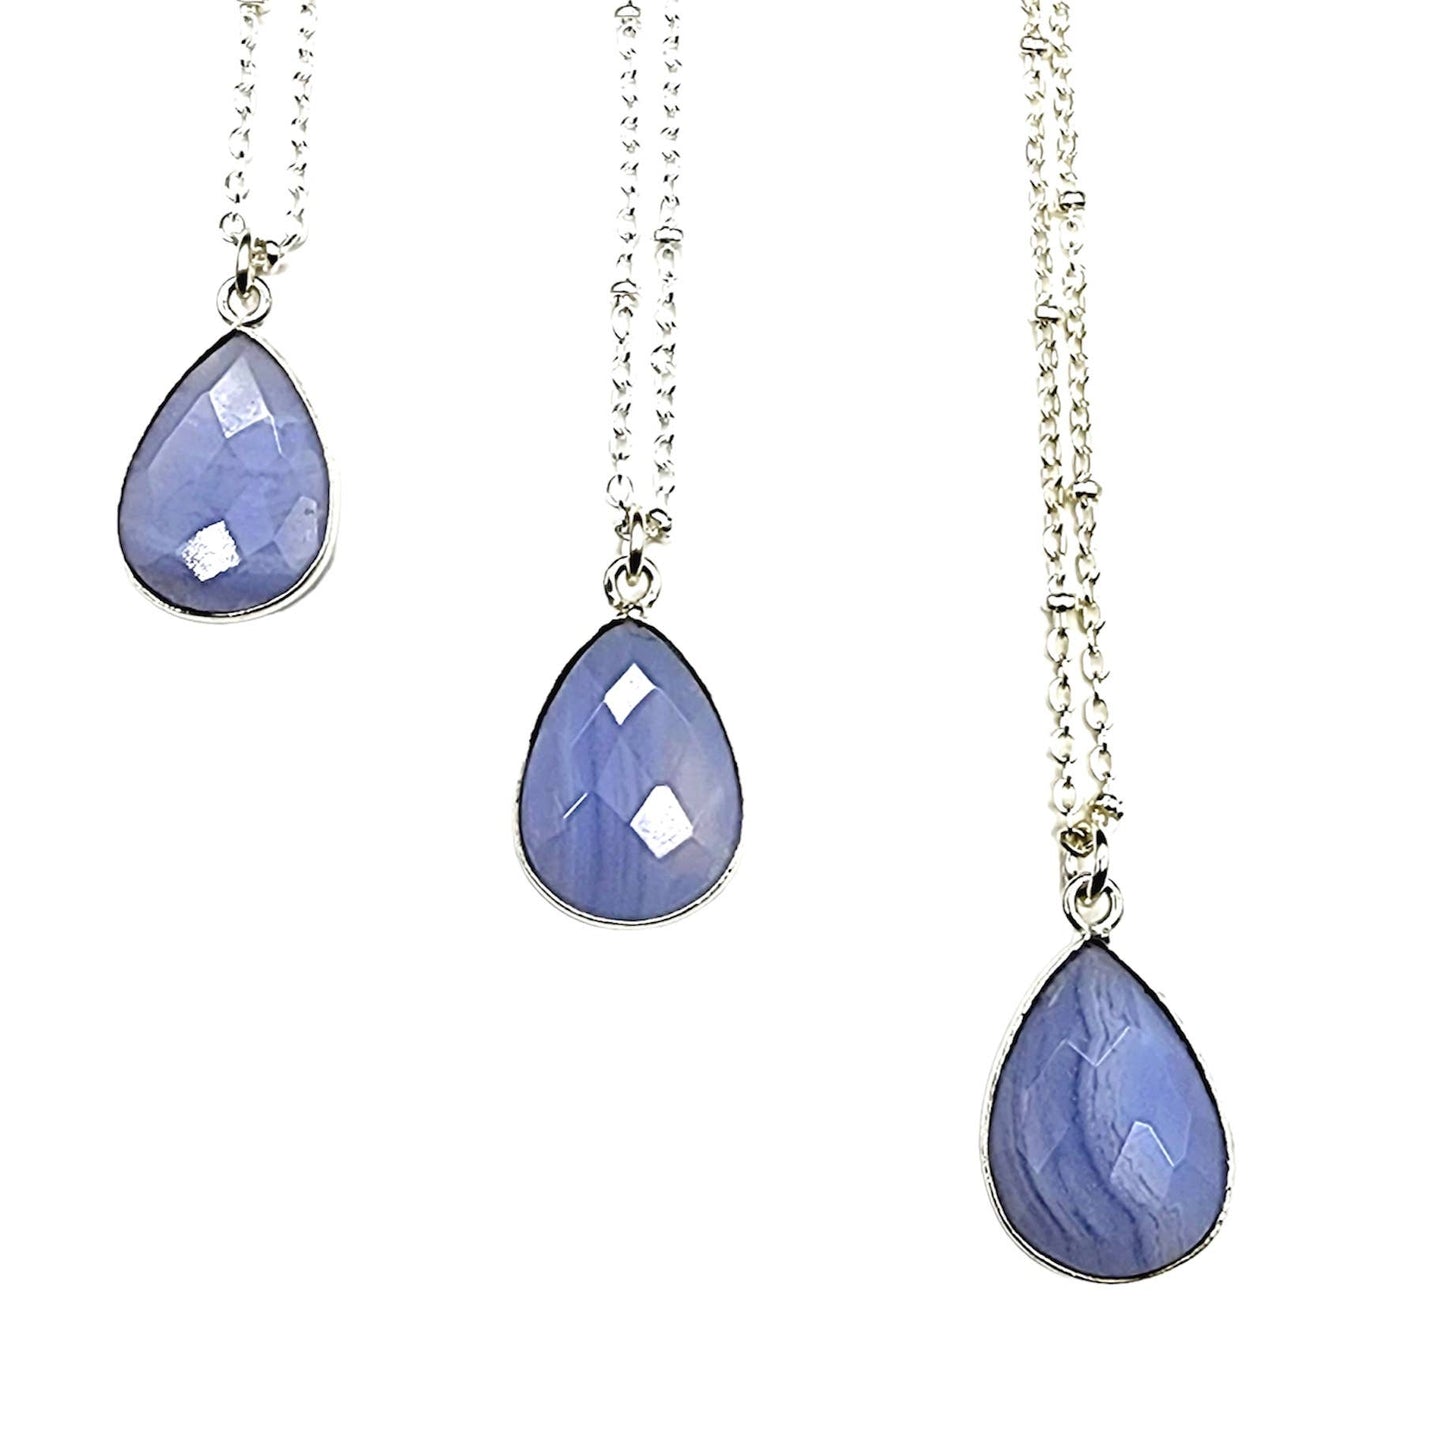 Dainty Faceted Blue Lace Agate Teardrop Necklace